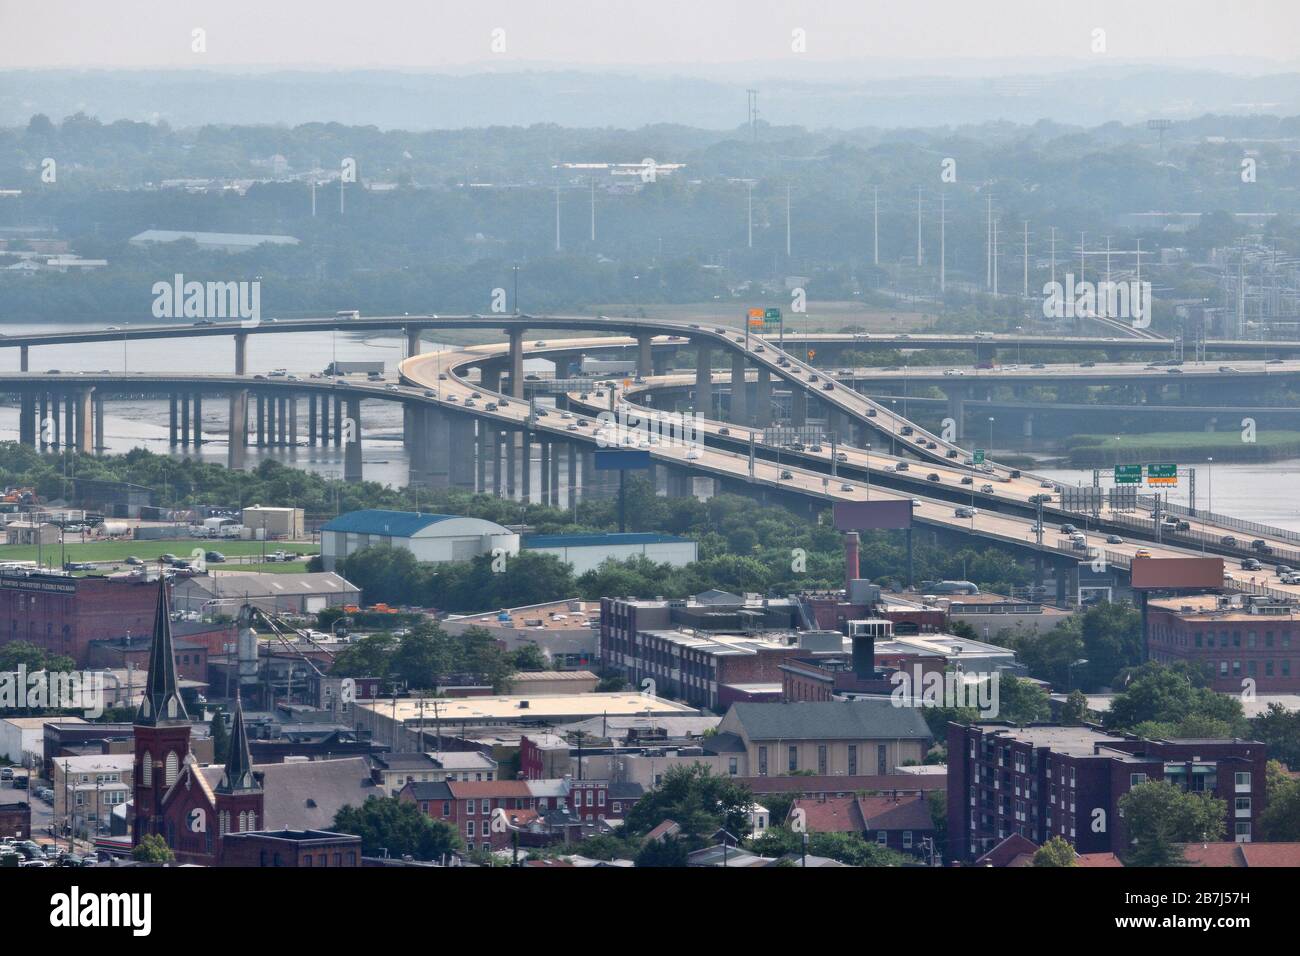 Baltimore, Maryland interstate highway intersection. I-395 meets I-95. Stock Photo